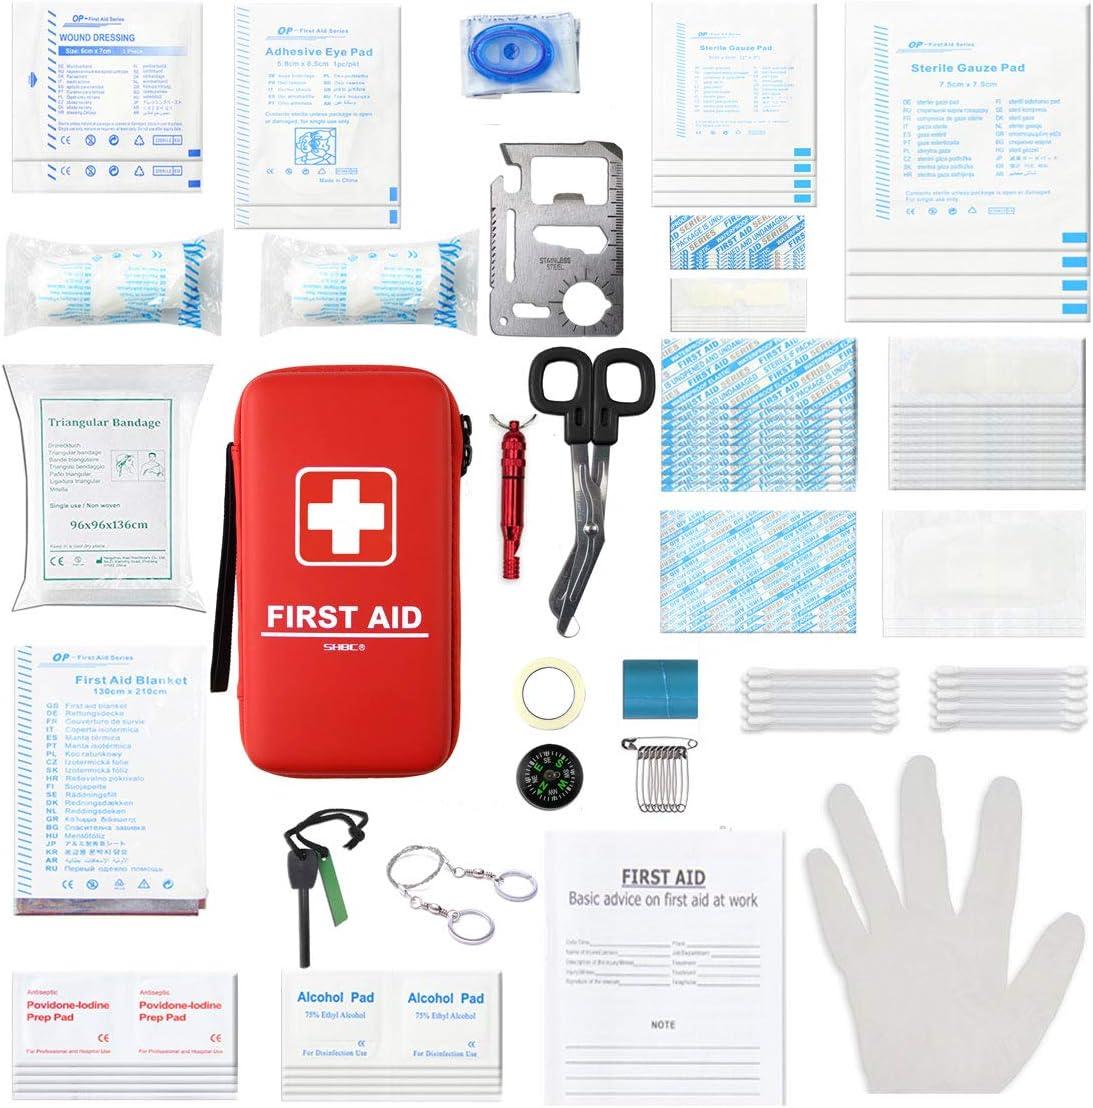 Compact First Aid Kit (228pcs) Designed for Family Emergency Care.  Waterproof EVA Case and Bag is Ideal for The Car, Home, Boat, School,  Camping